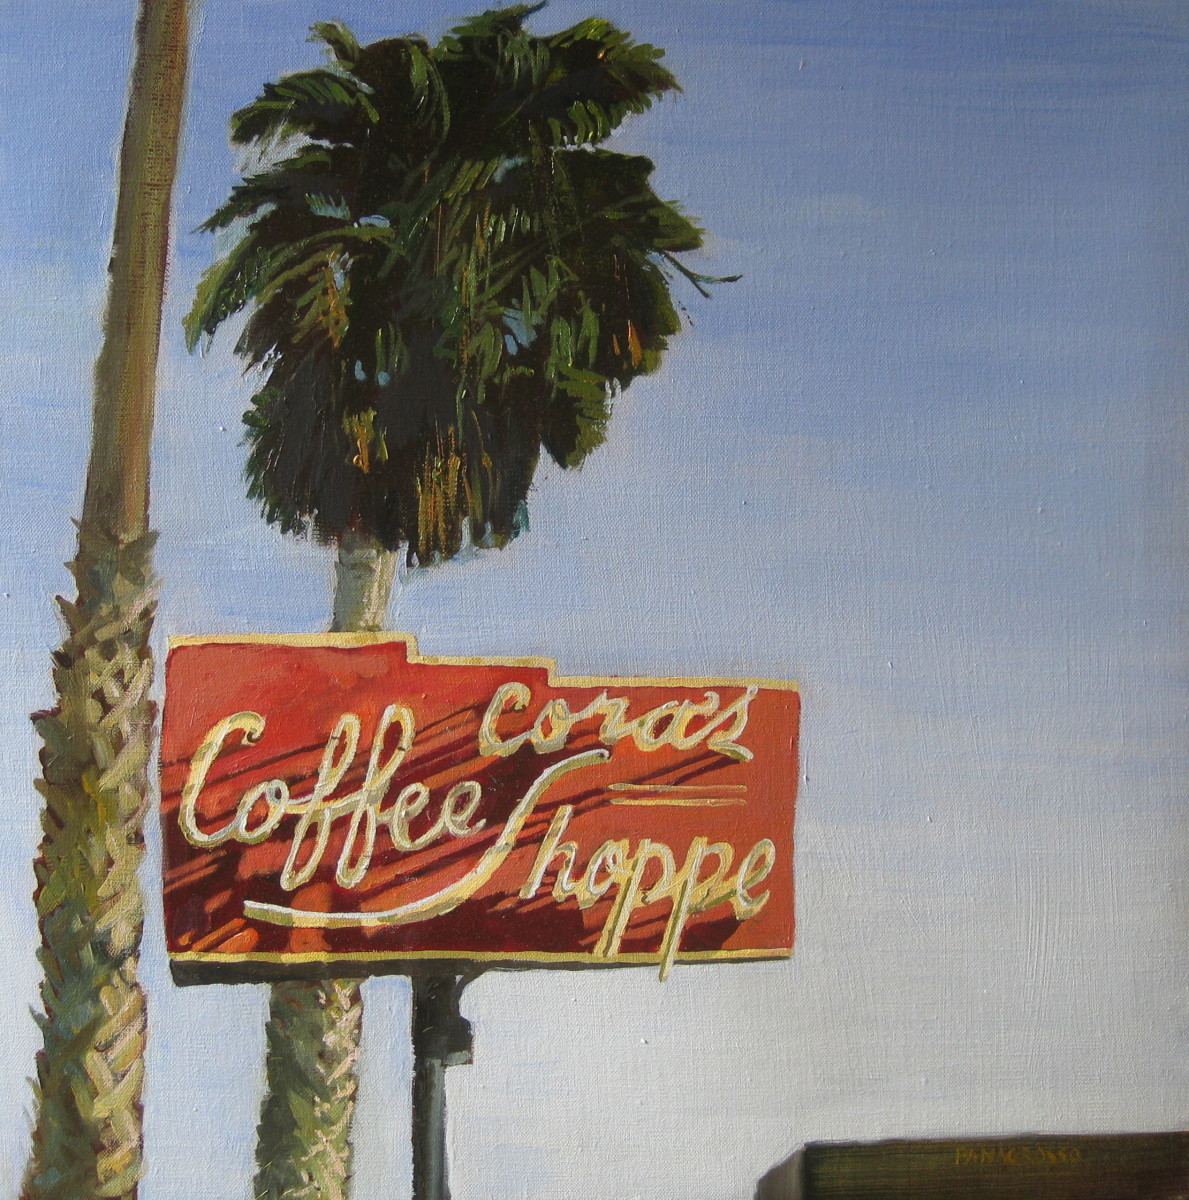 Cora's Coffee Shoppe by Felice (Phil) Panagrosso 